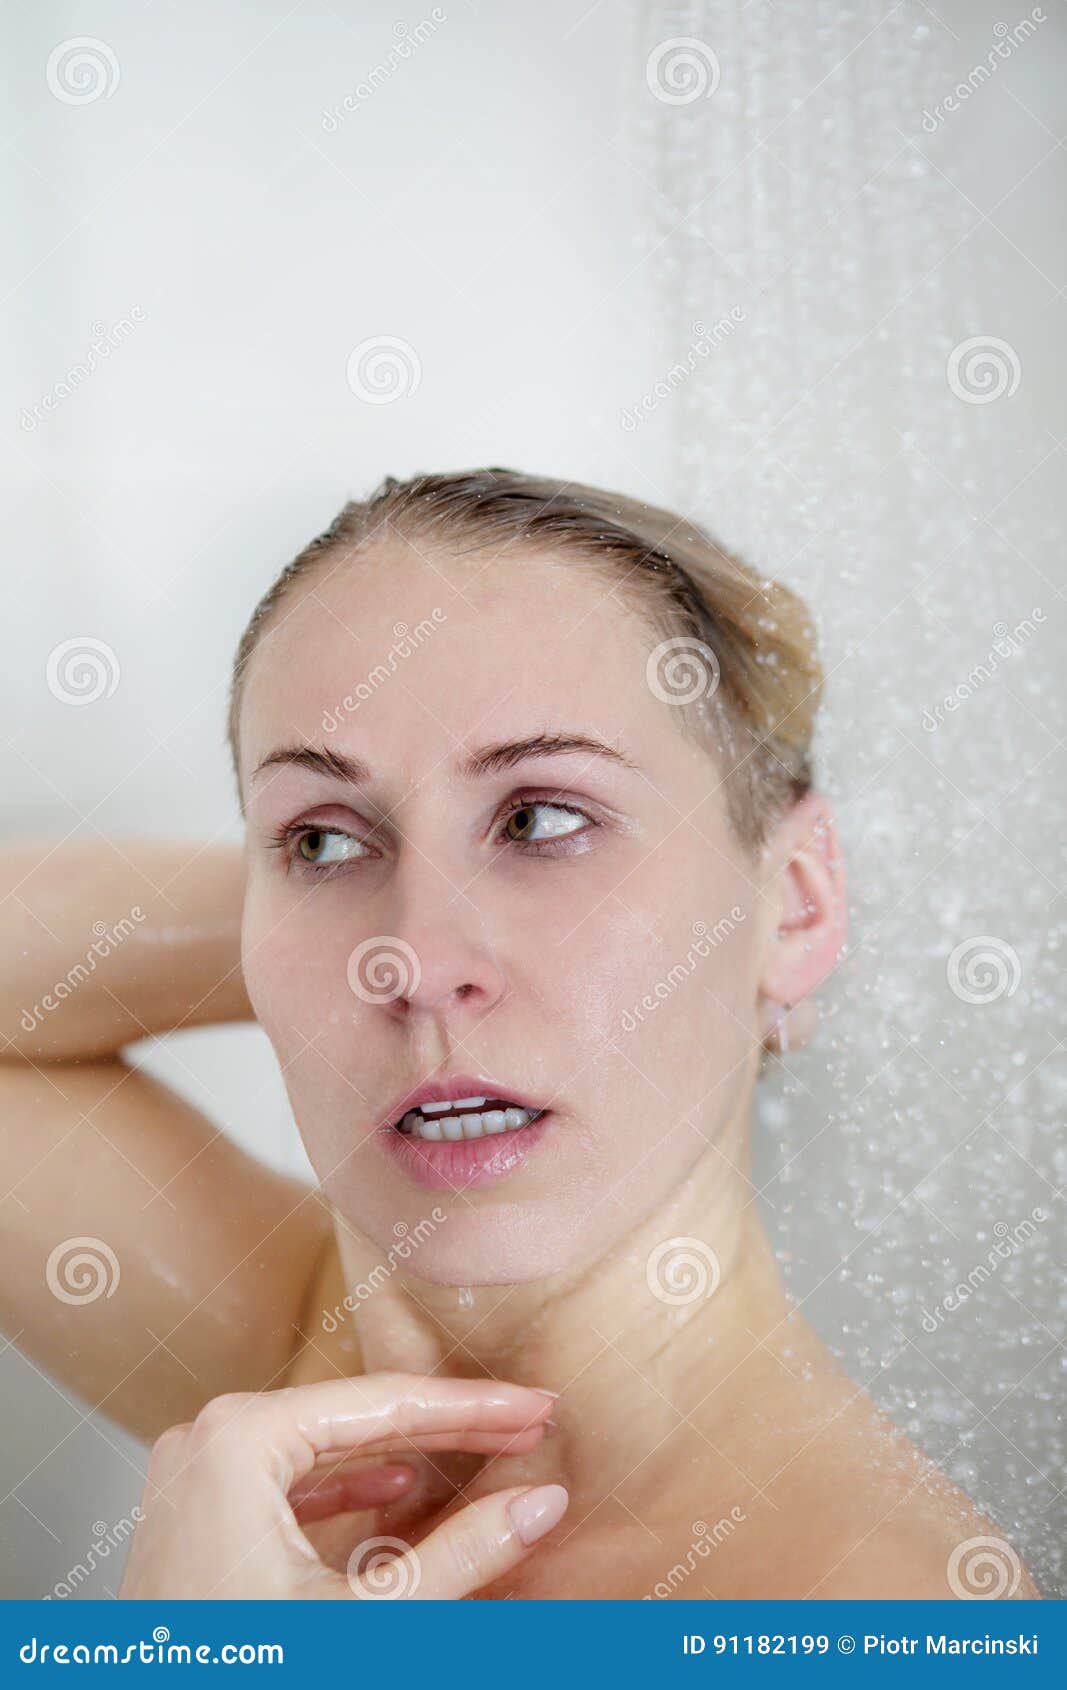 Woman In Shower Washing Her Hair High-Res Stock Photo 